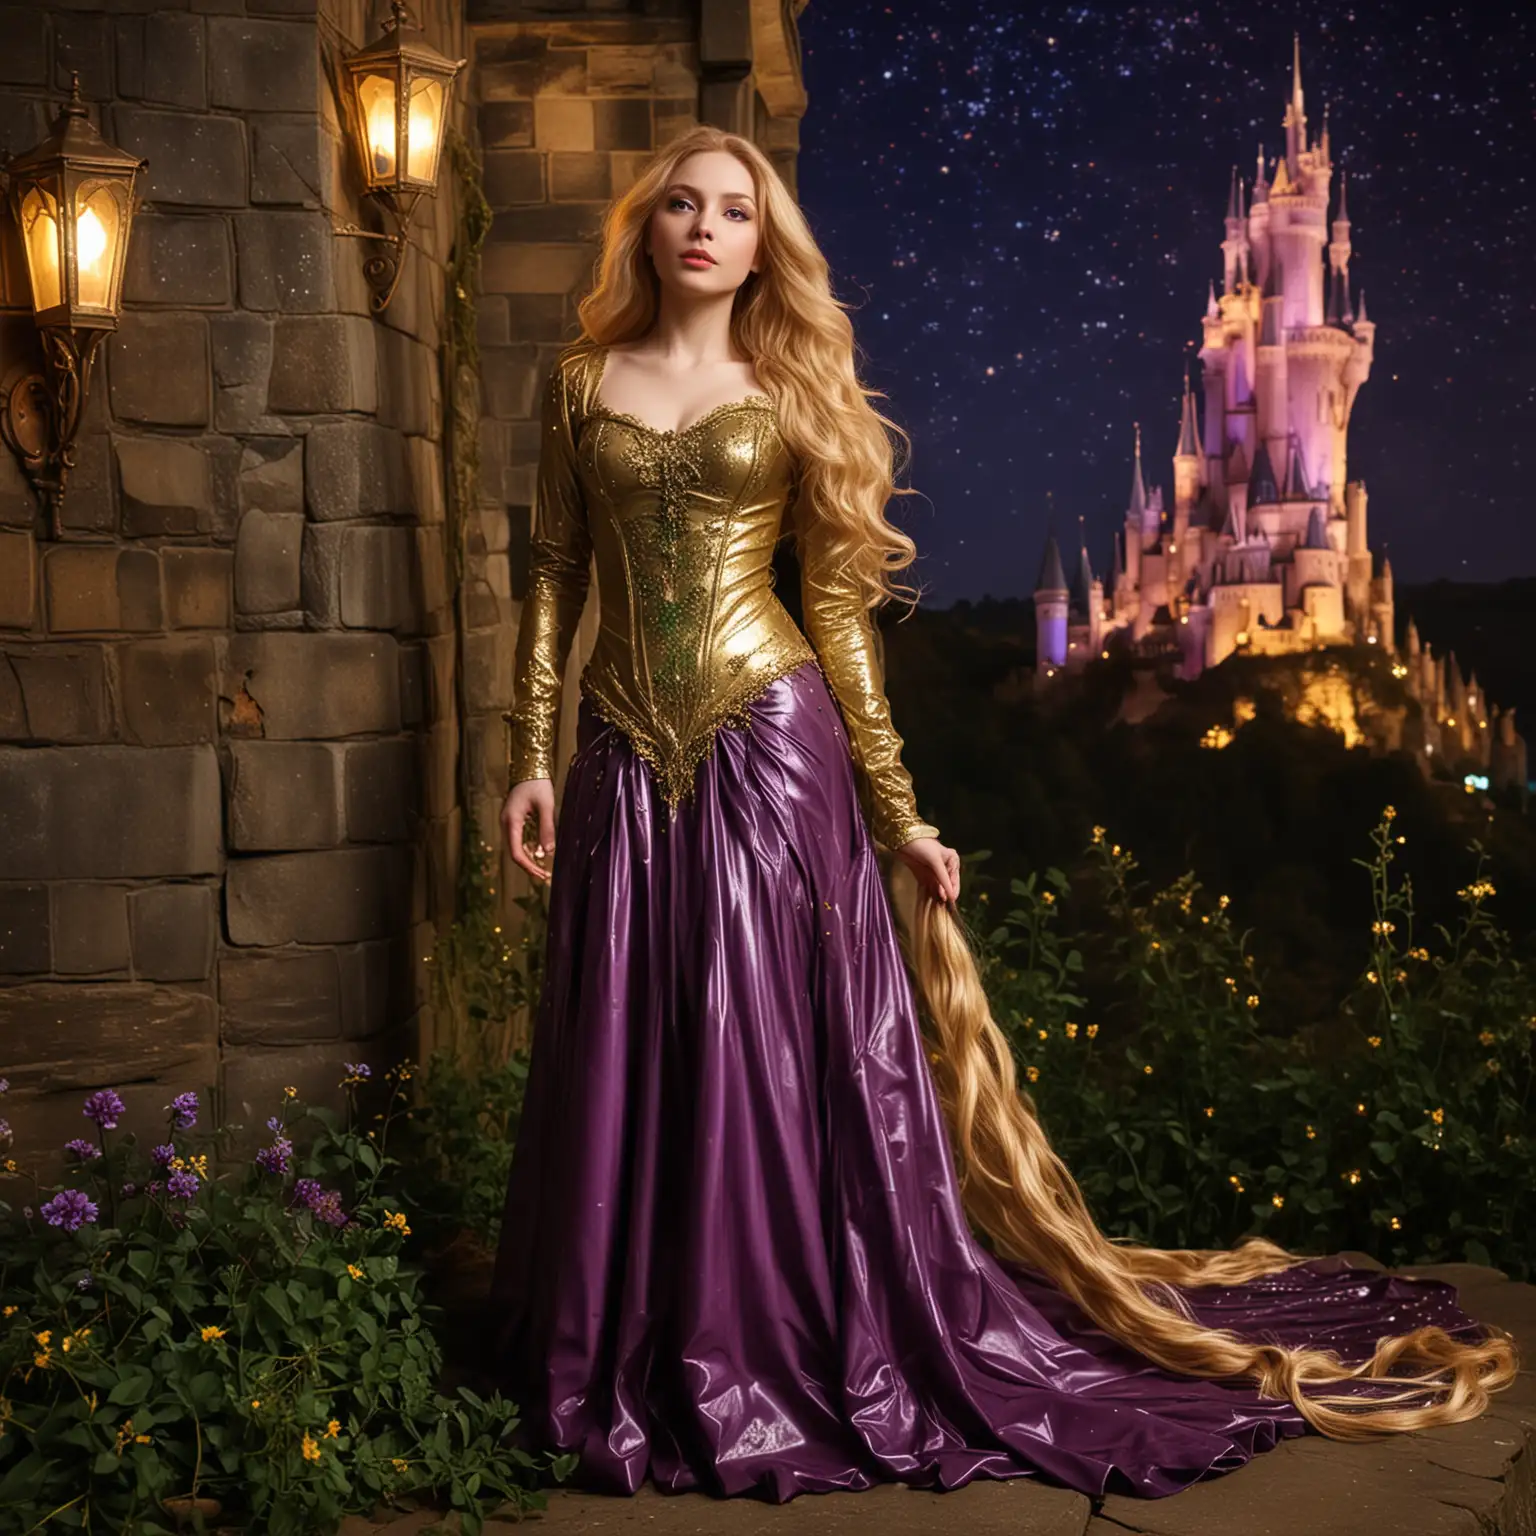 Rapunzel Inspired Latex Dress in Purple and Gold Tones with Tower Backdrop